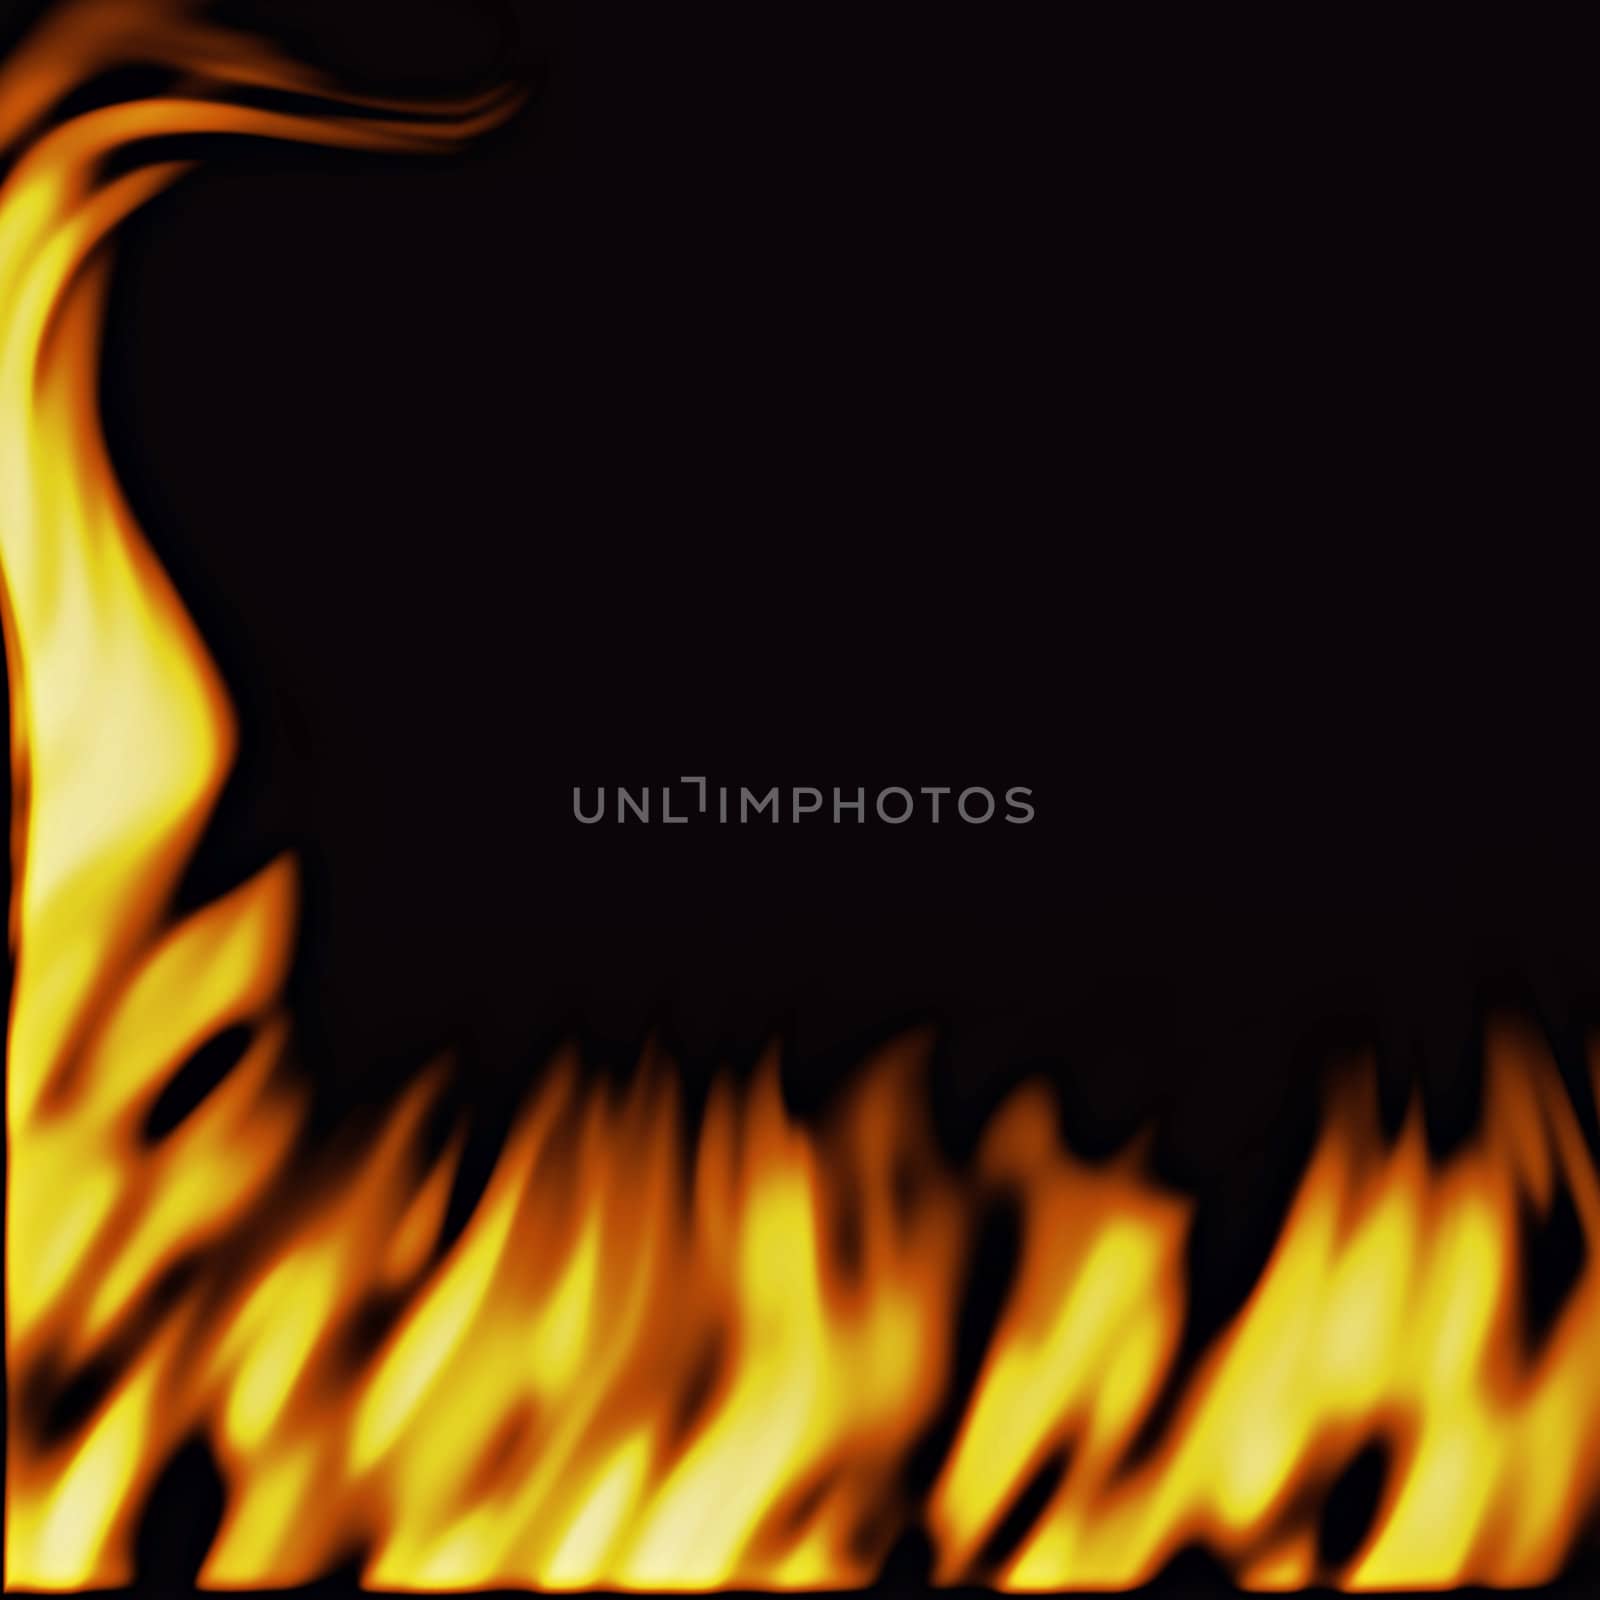 a large illustration of firey flames on a black background rising up